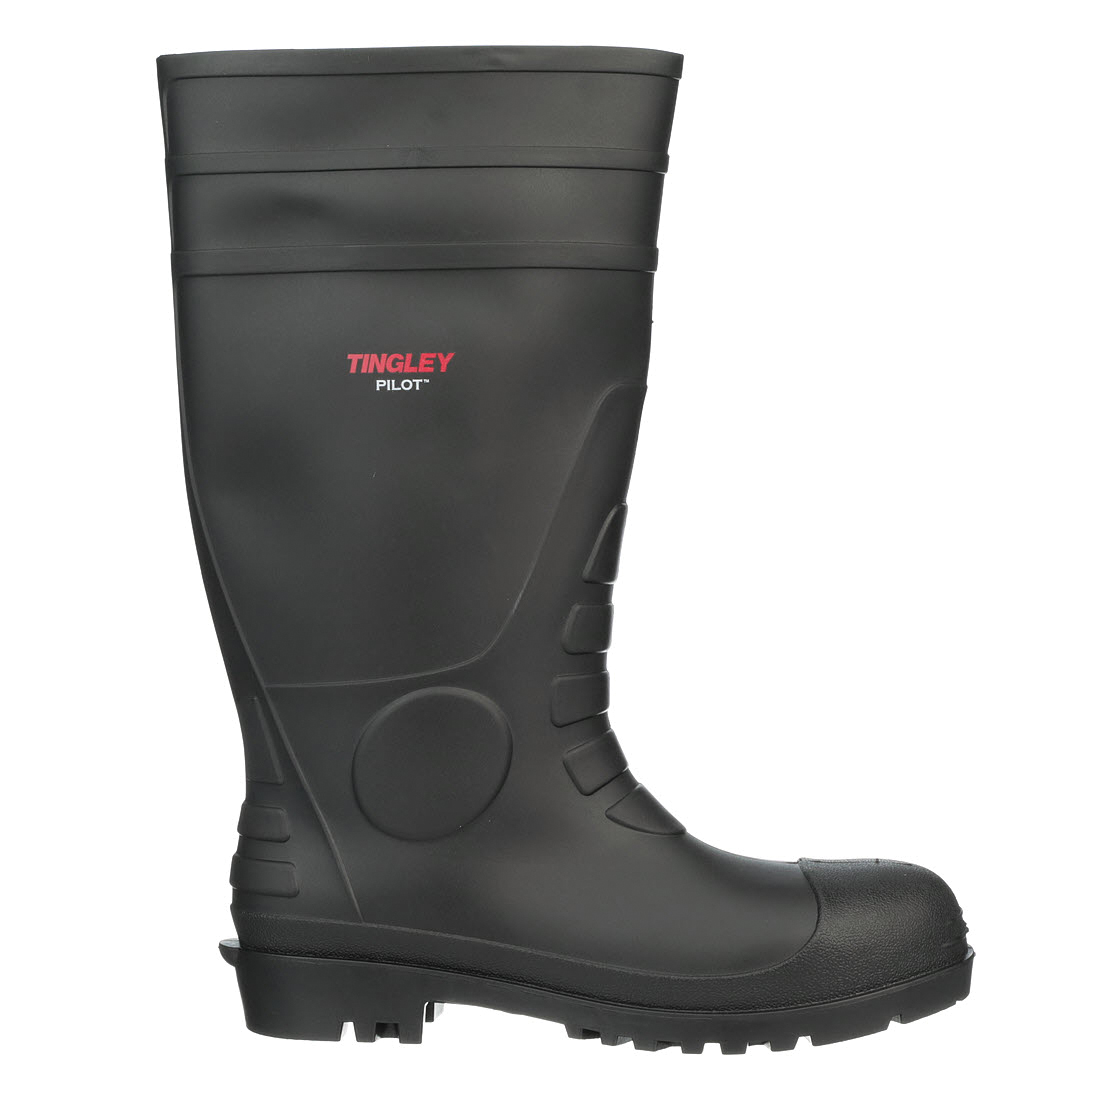 Tingley 31144-06 Economy Grade General Purpose Knee Boots, Men's, SZ 6, 15 in H, Plain Toe, PVC Upper, PVC Outsole, Resists: Abrasion, Acid, Alkalis, Caustics, Chemicals, Hydrocarbon, Salts and Water, ASTM F2413 M I/75/C/75